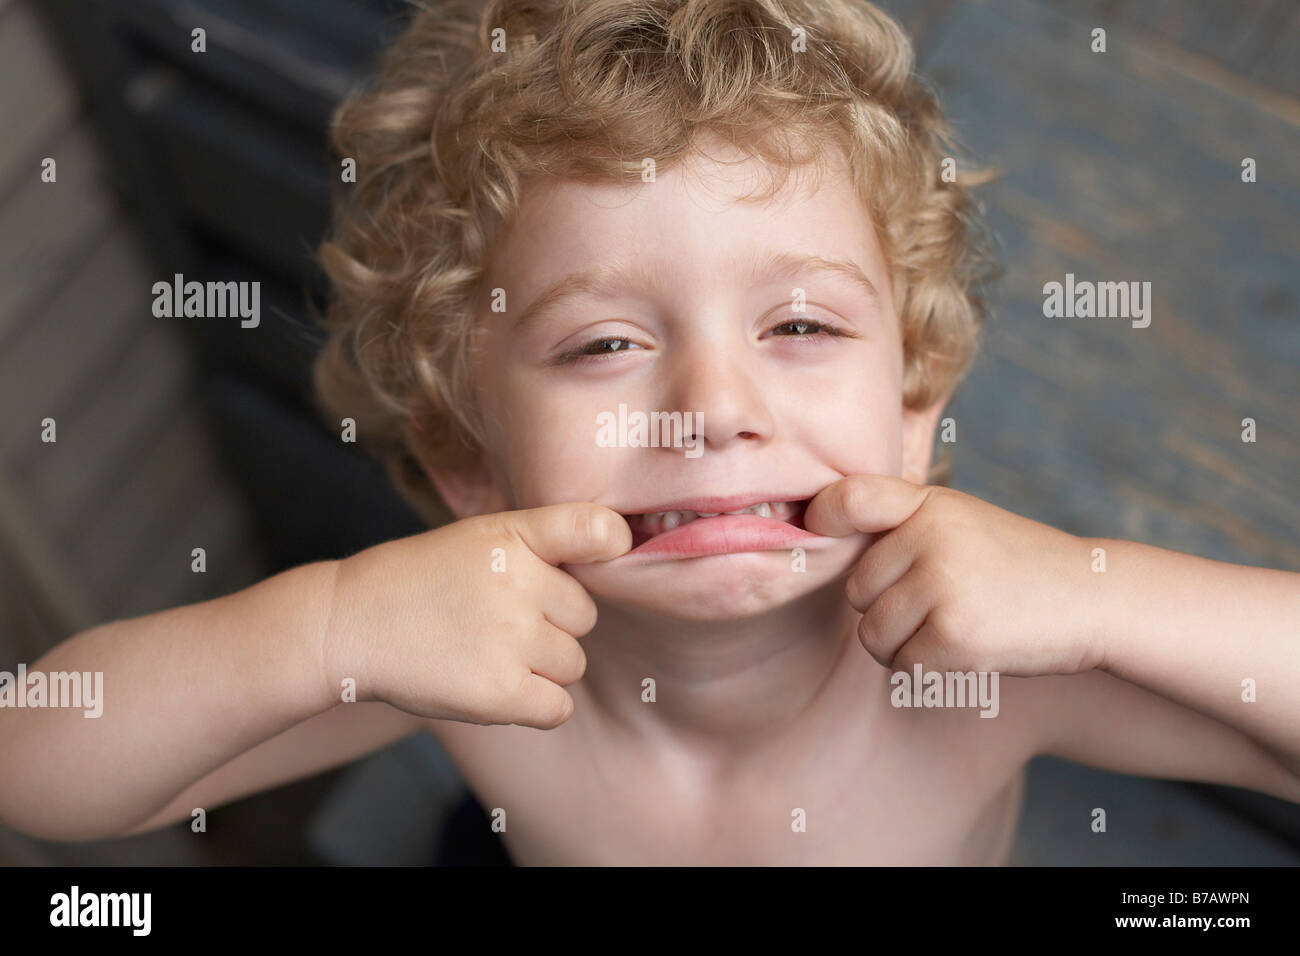 Little Boy Making Faces Stock Photo